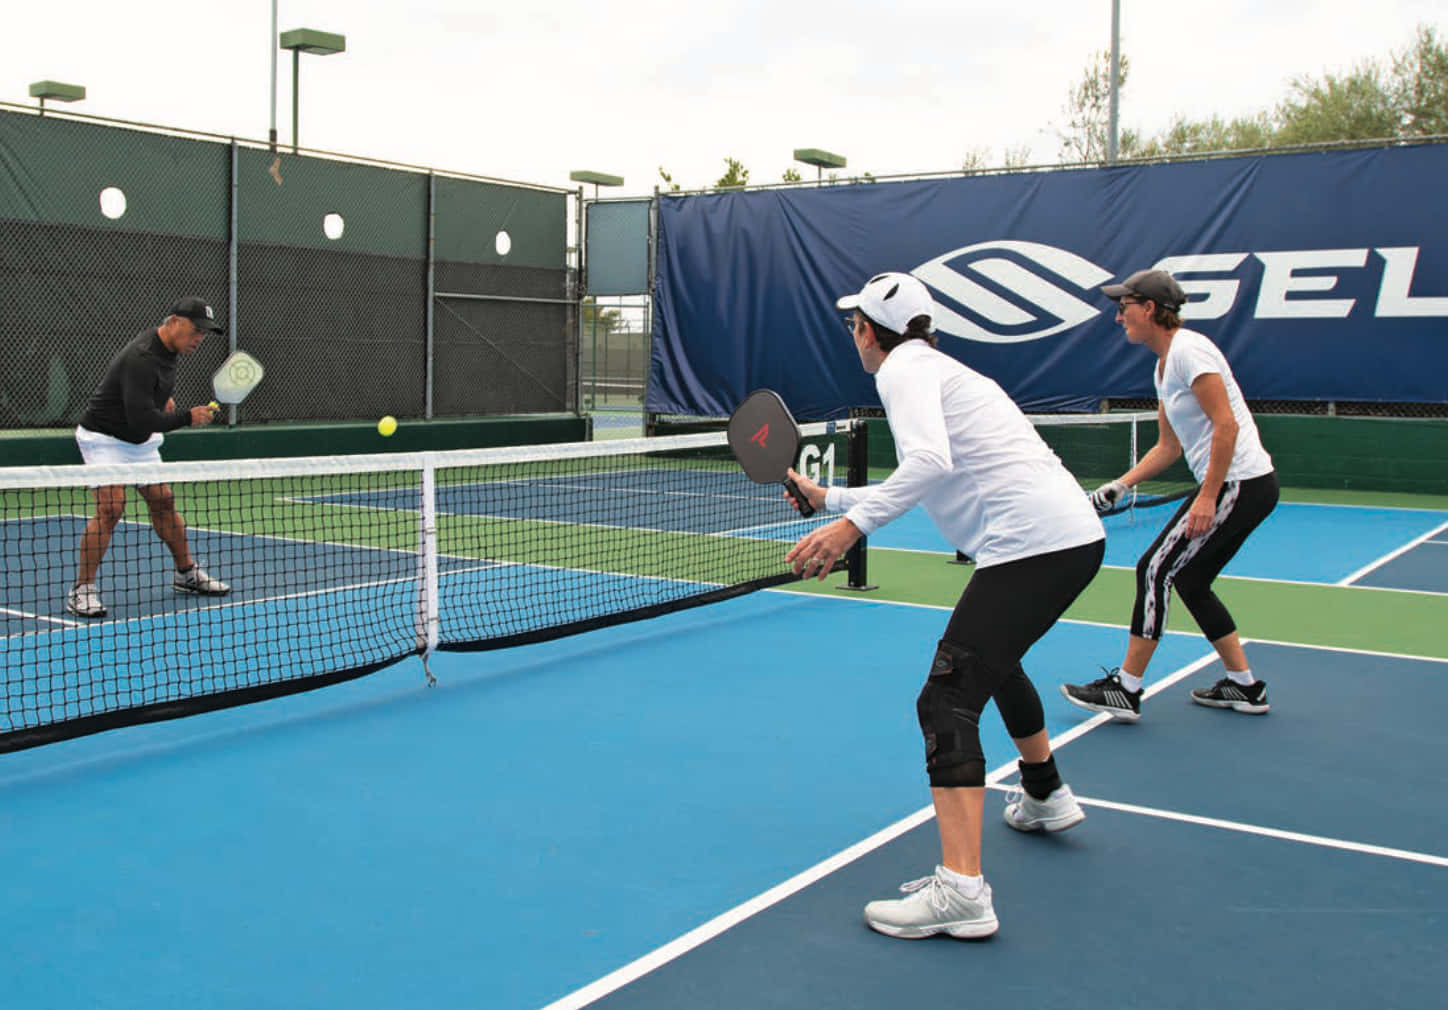 Playing pickleball doubles is a fun way to connect with friends and family